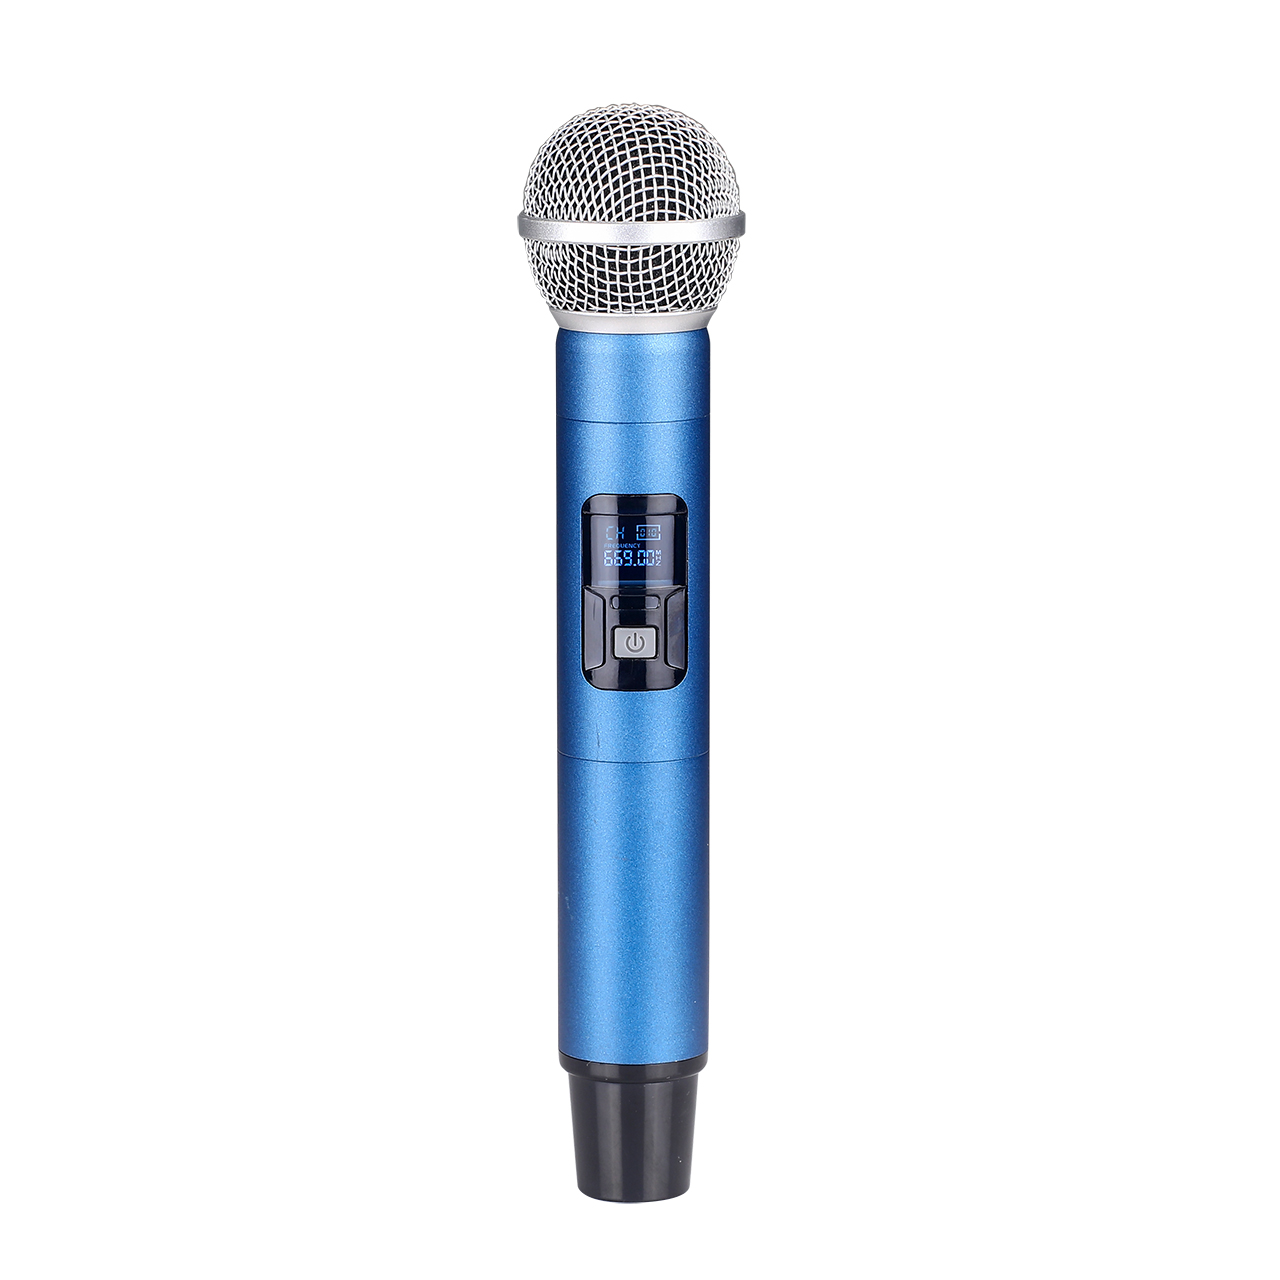 Unleashing the Power of Sound: microphone AY-863 china Takes the Stage